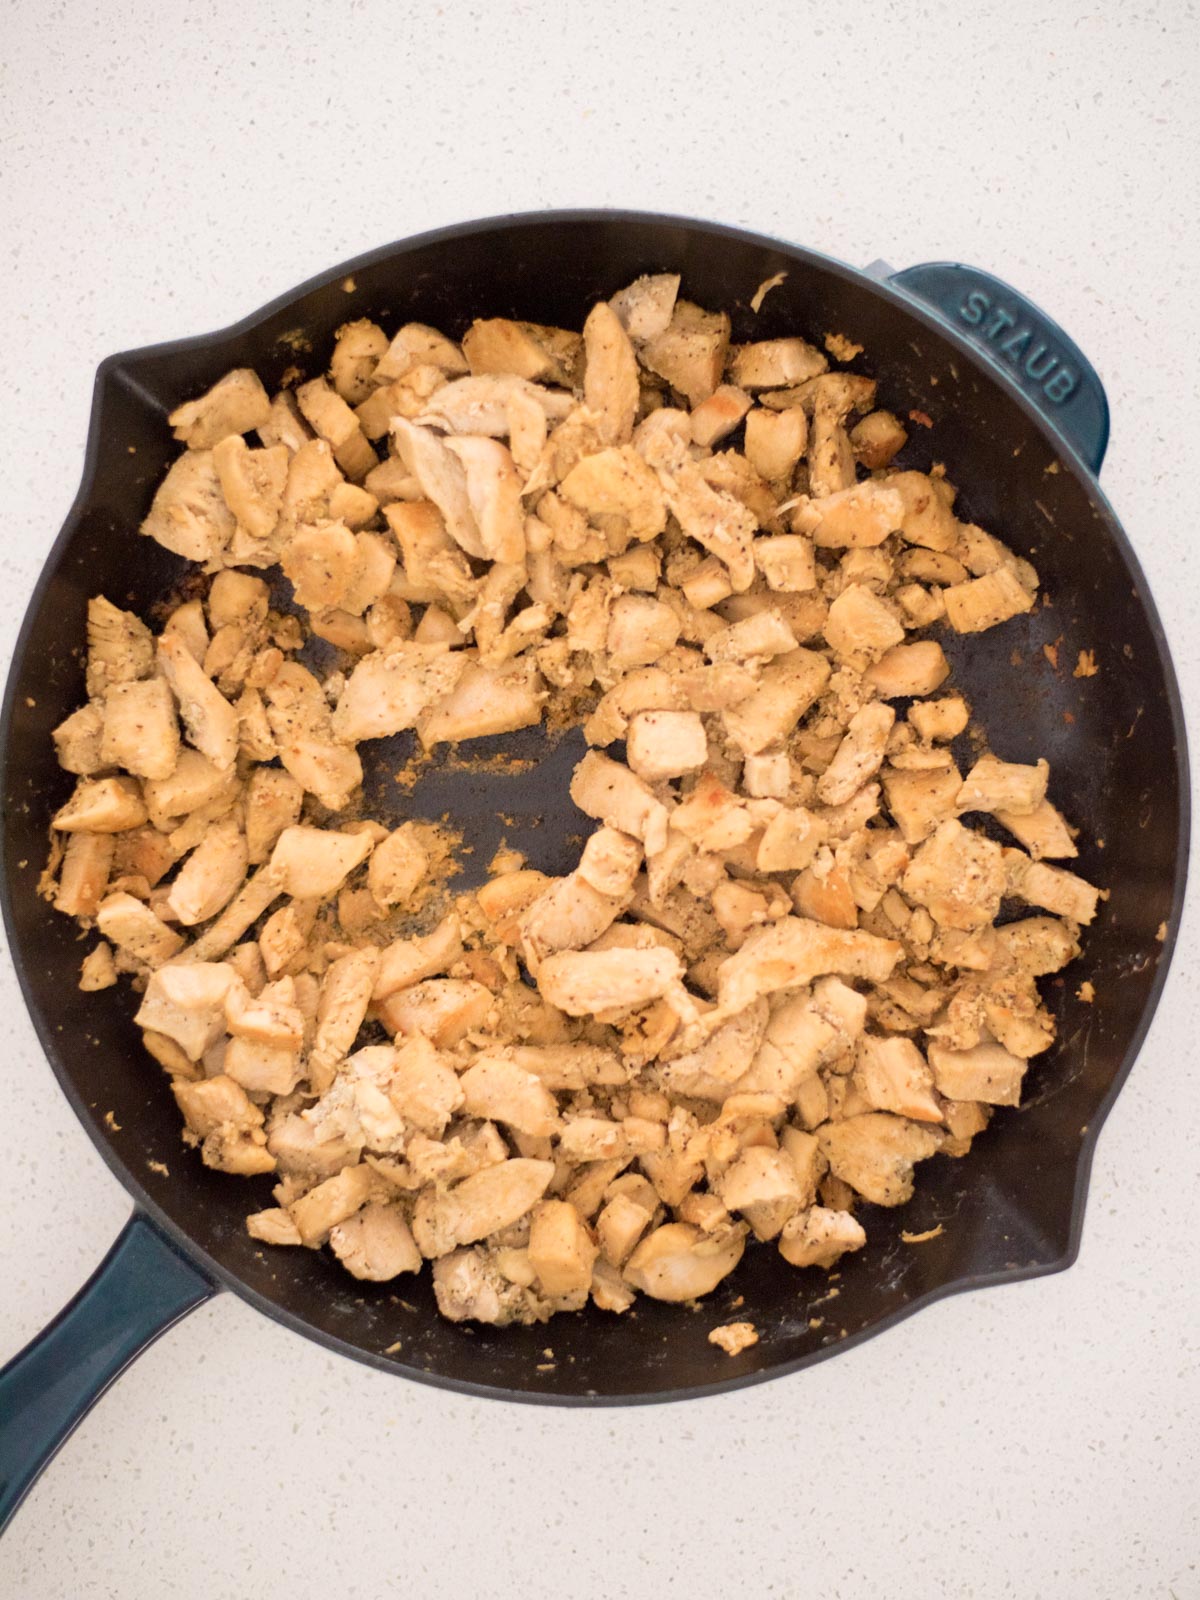 chicken cooked in a skillet